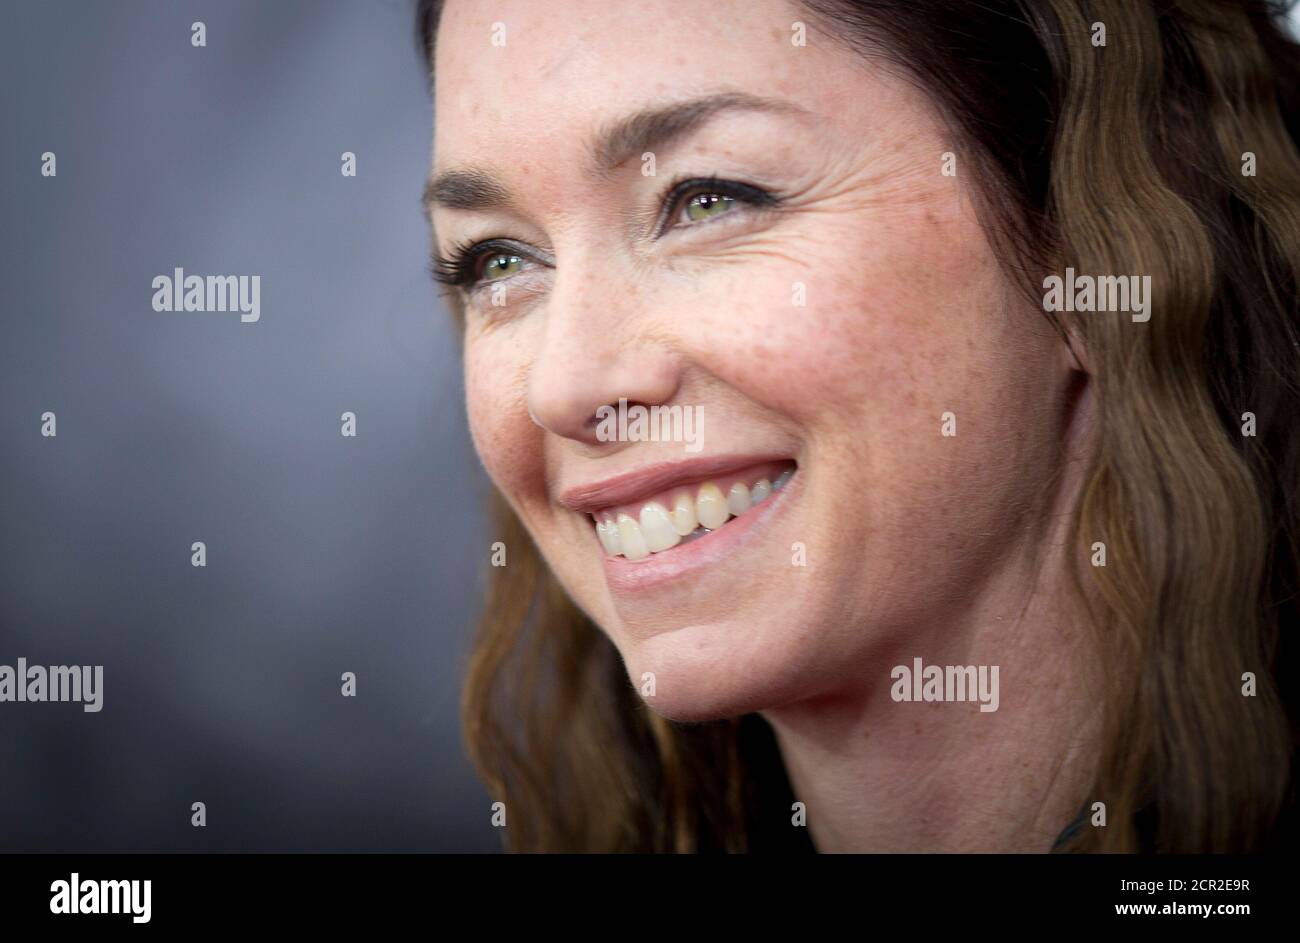 Actress Julianne Nicholson arrives for the premiere of the movie 'August: Osage County' in New York December 12, 2013.   REUTERS/Carlo Allegri (UNITED STATES - Tags: ENTERTAINMENT) Stock Photo